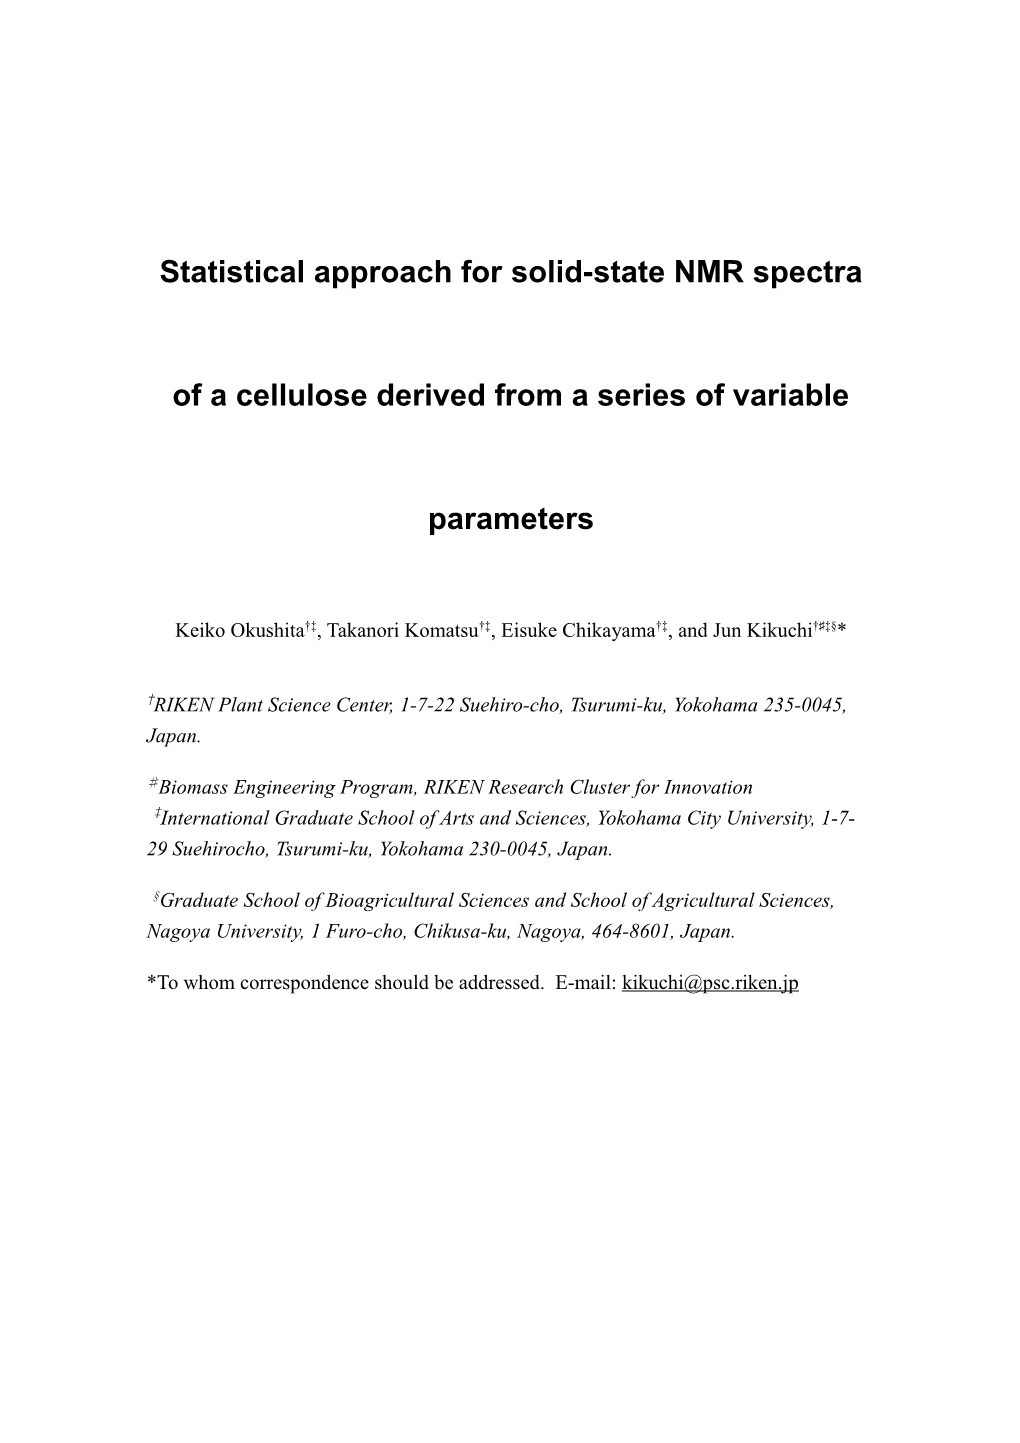 Statistical Approach for Solid-State NMR Spectra of a Cellulose Derived from a Series